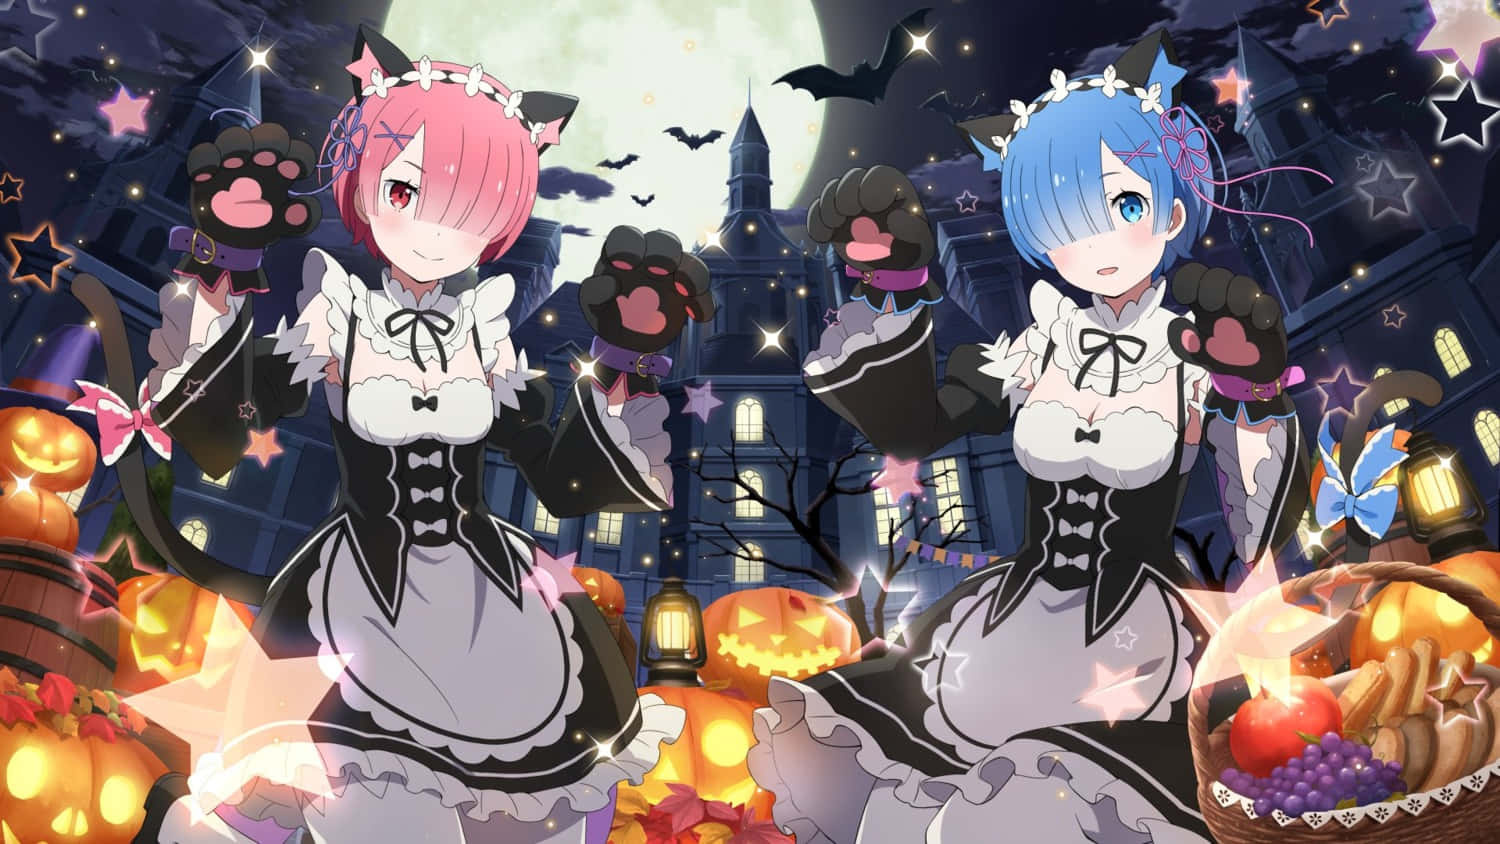 Two Anime Girls In Costumes With Pumpkins In The Background Wallpaper